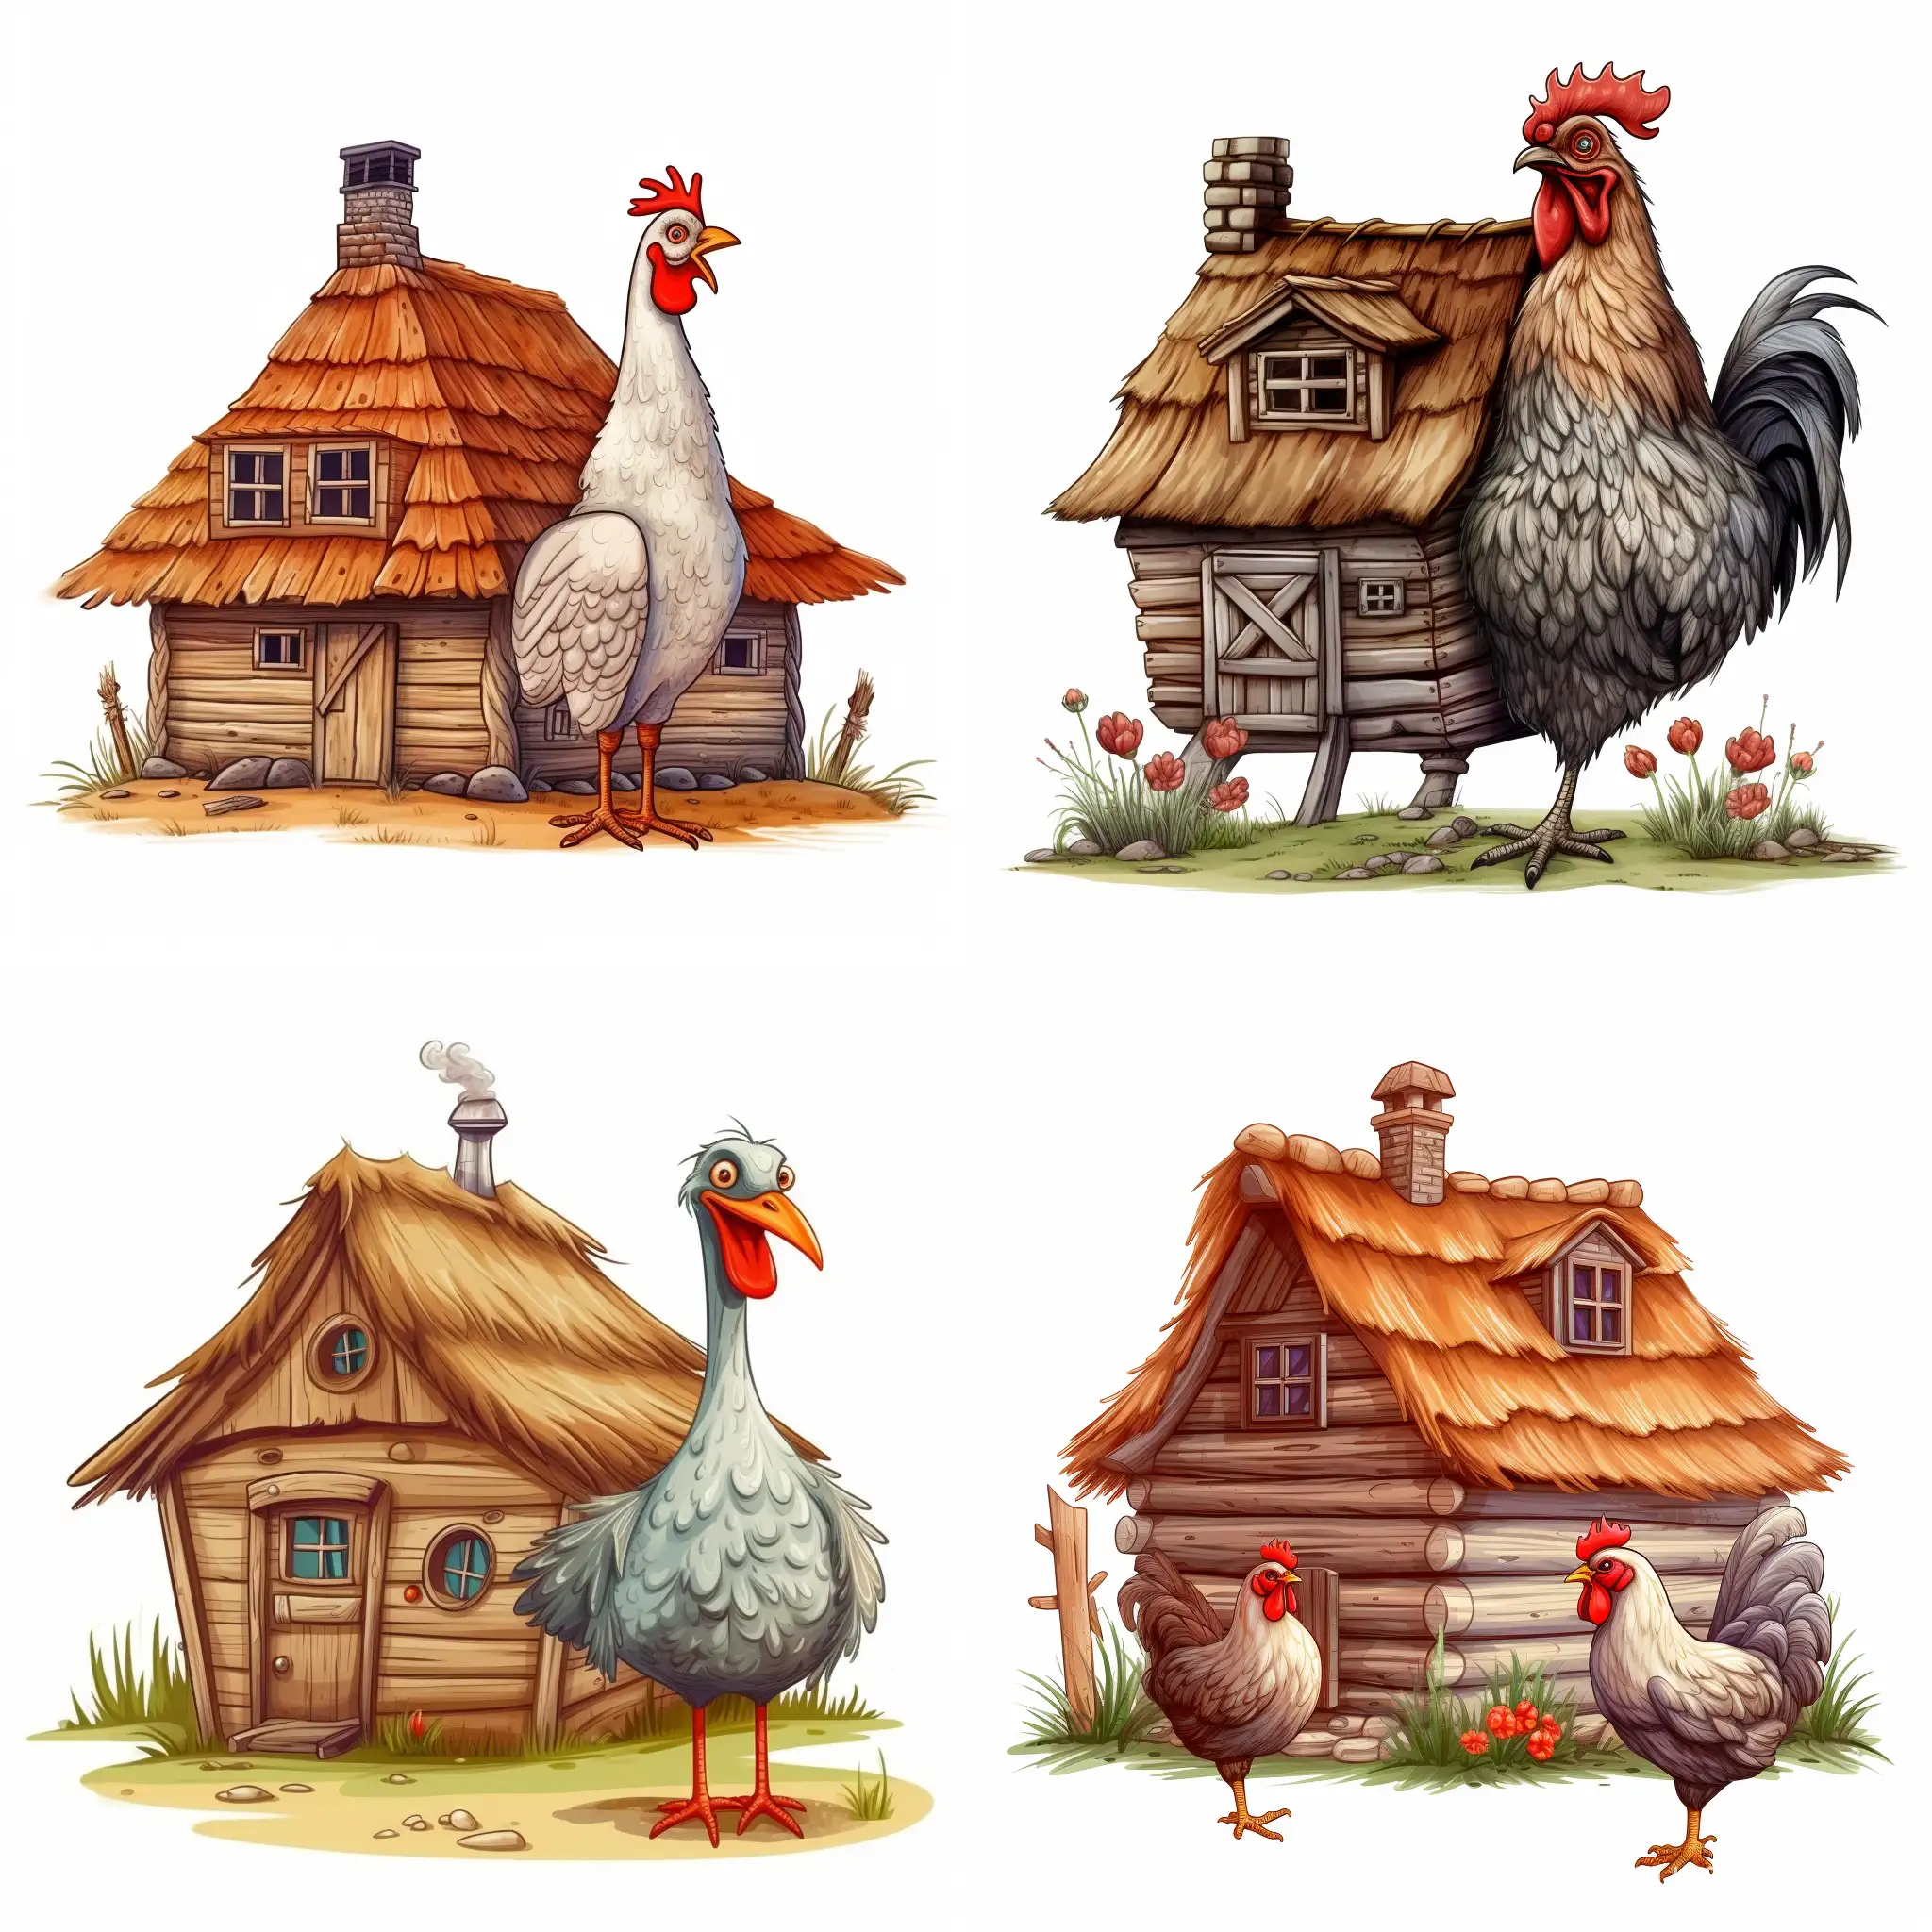 Quaint-Log-Cabin-with-Chicken-Leg-Support-in-Cartoon-Style